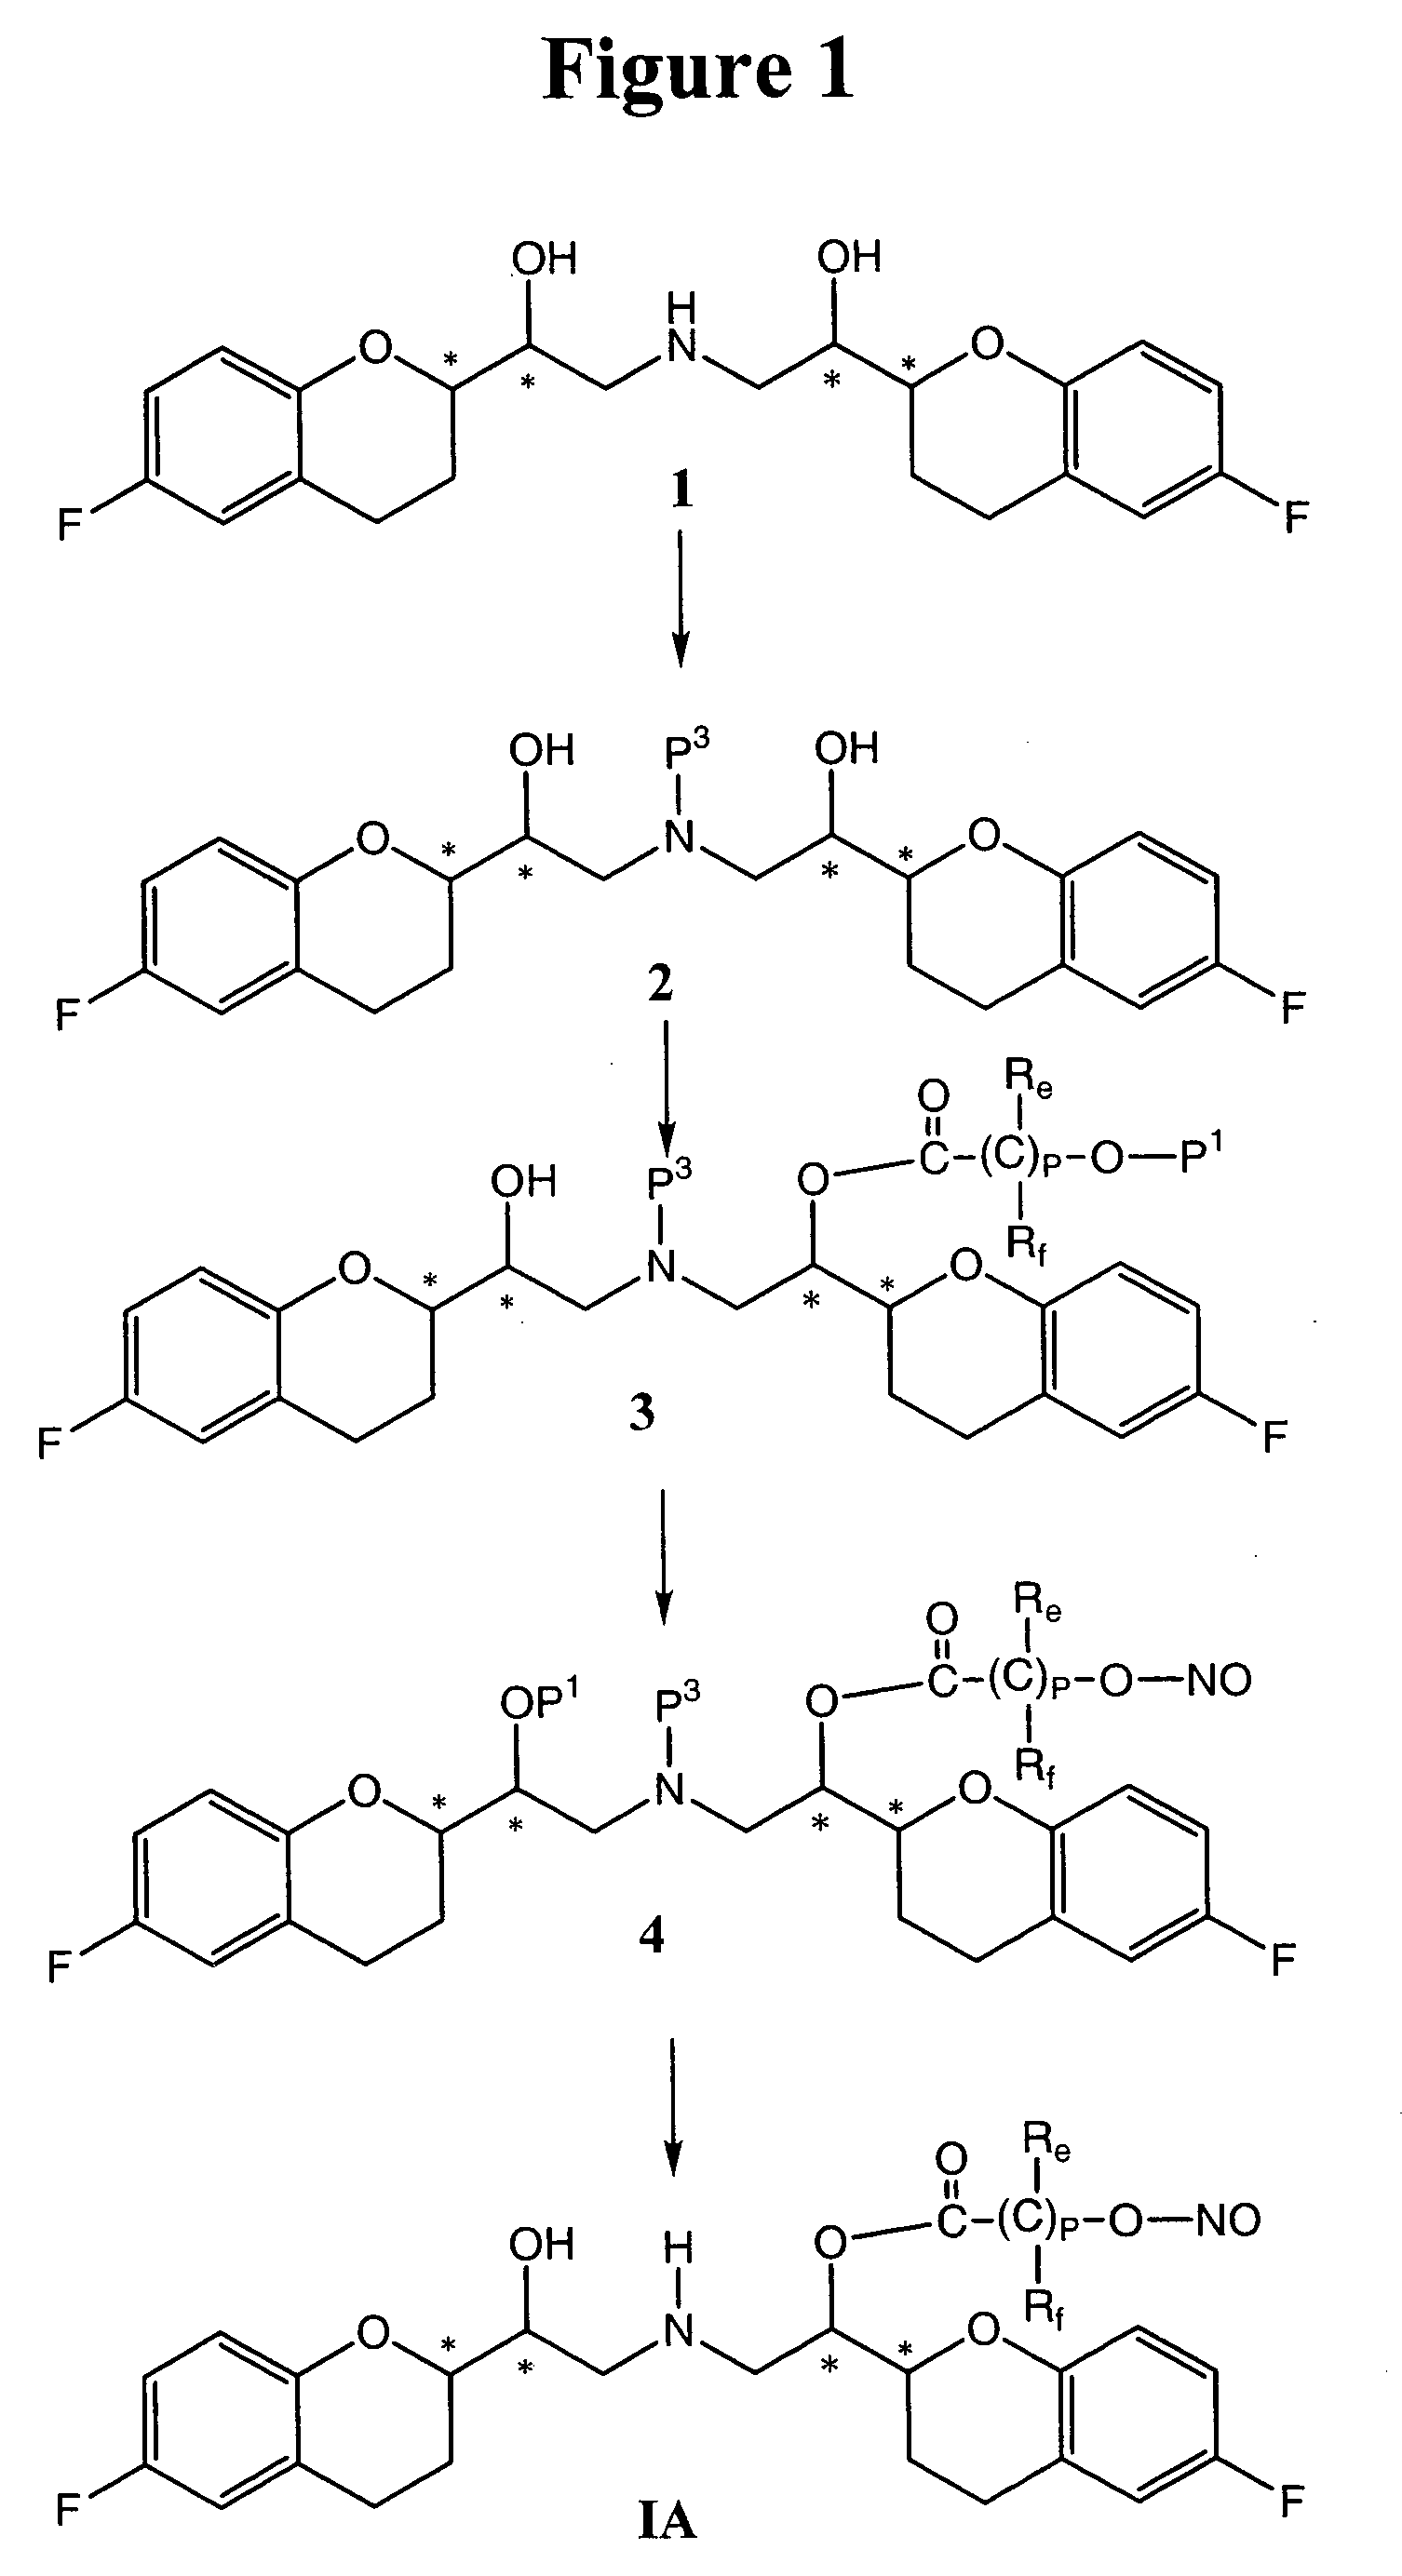 Nitrosated and nitrosylated nebivolol and its metabolites, compositions and methods of use